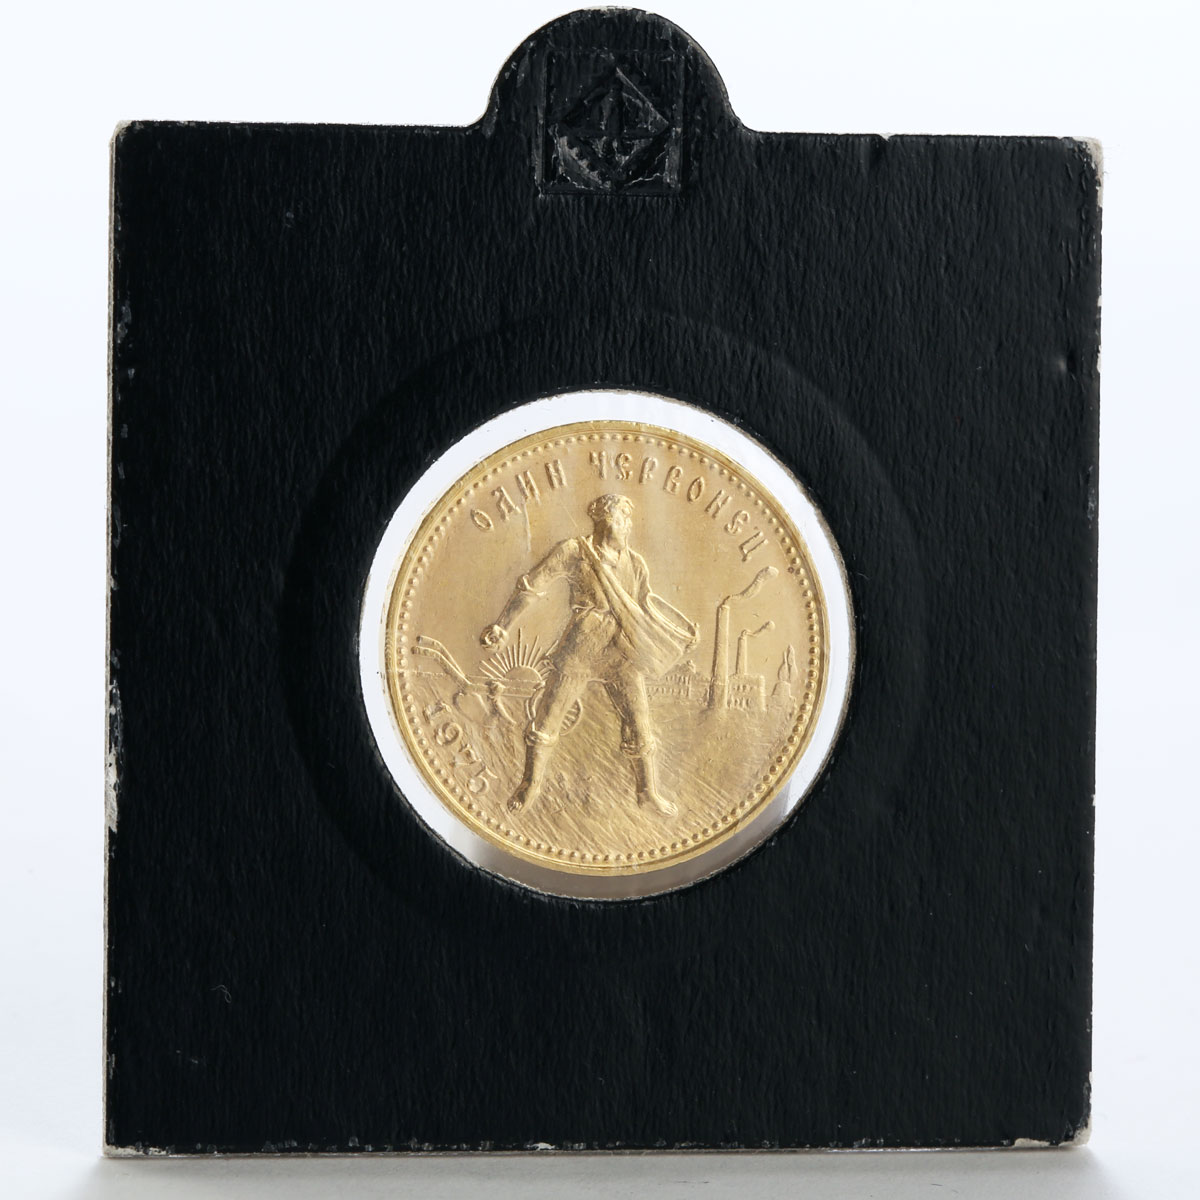 Soviet Union 1 chervonets Sower Workers of the world, unite! gold coin 1975